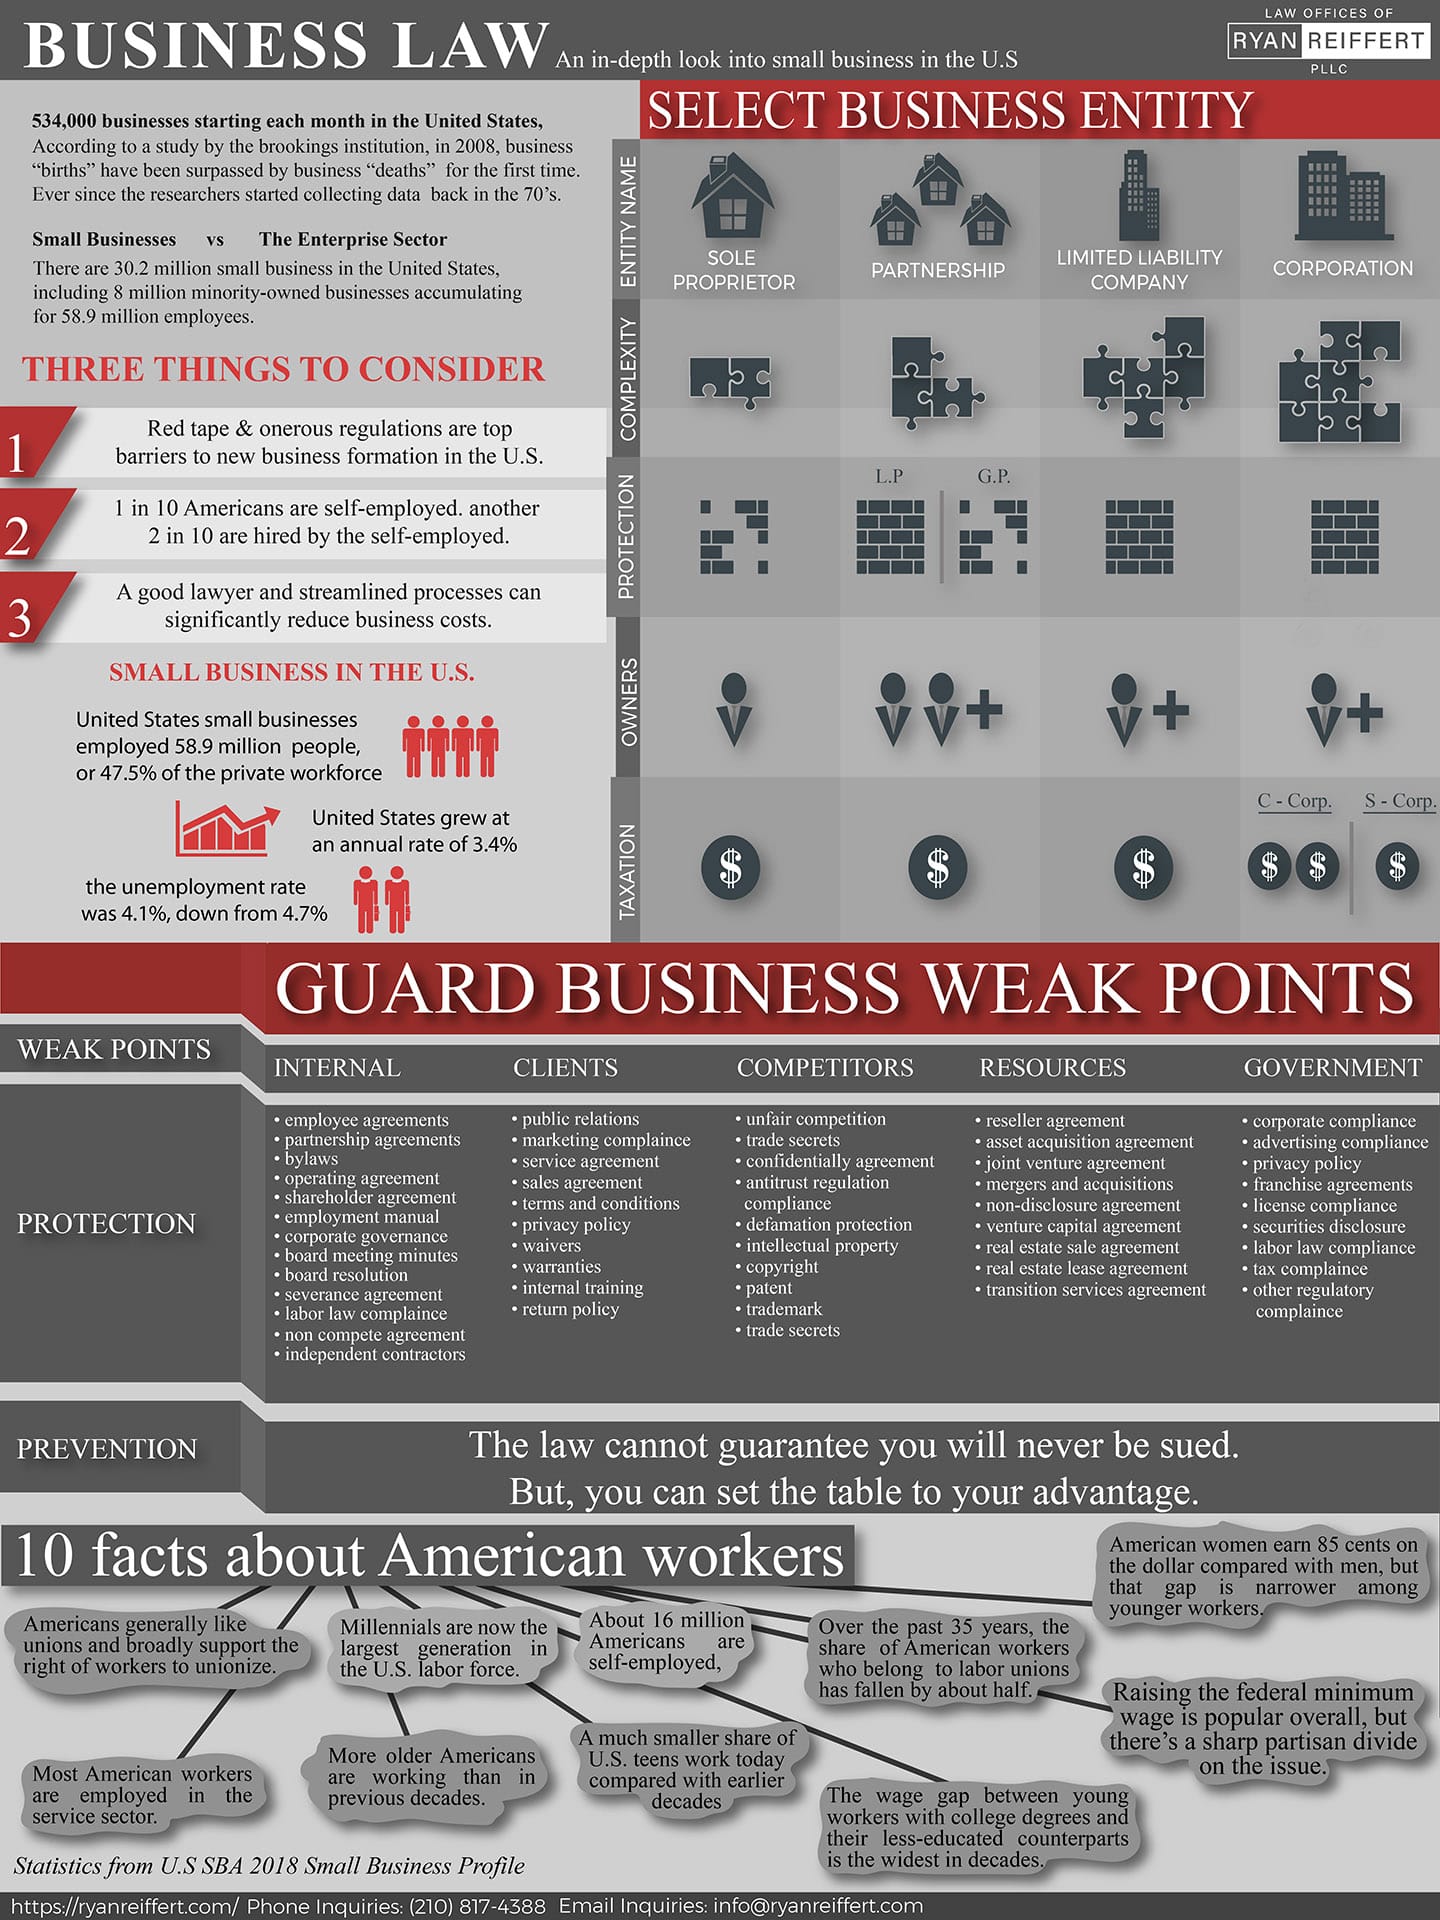 A detailed Infographic with statistics and visual explanations about Business Law, and specifically Small Business Law in the US.